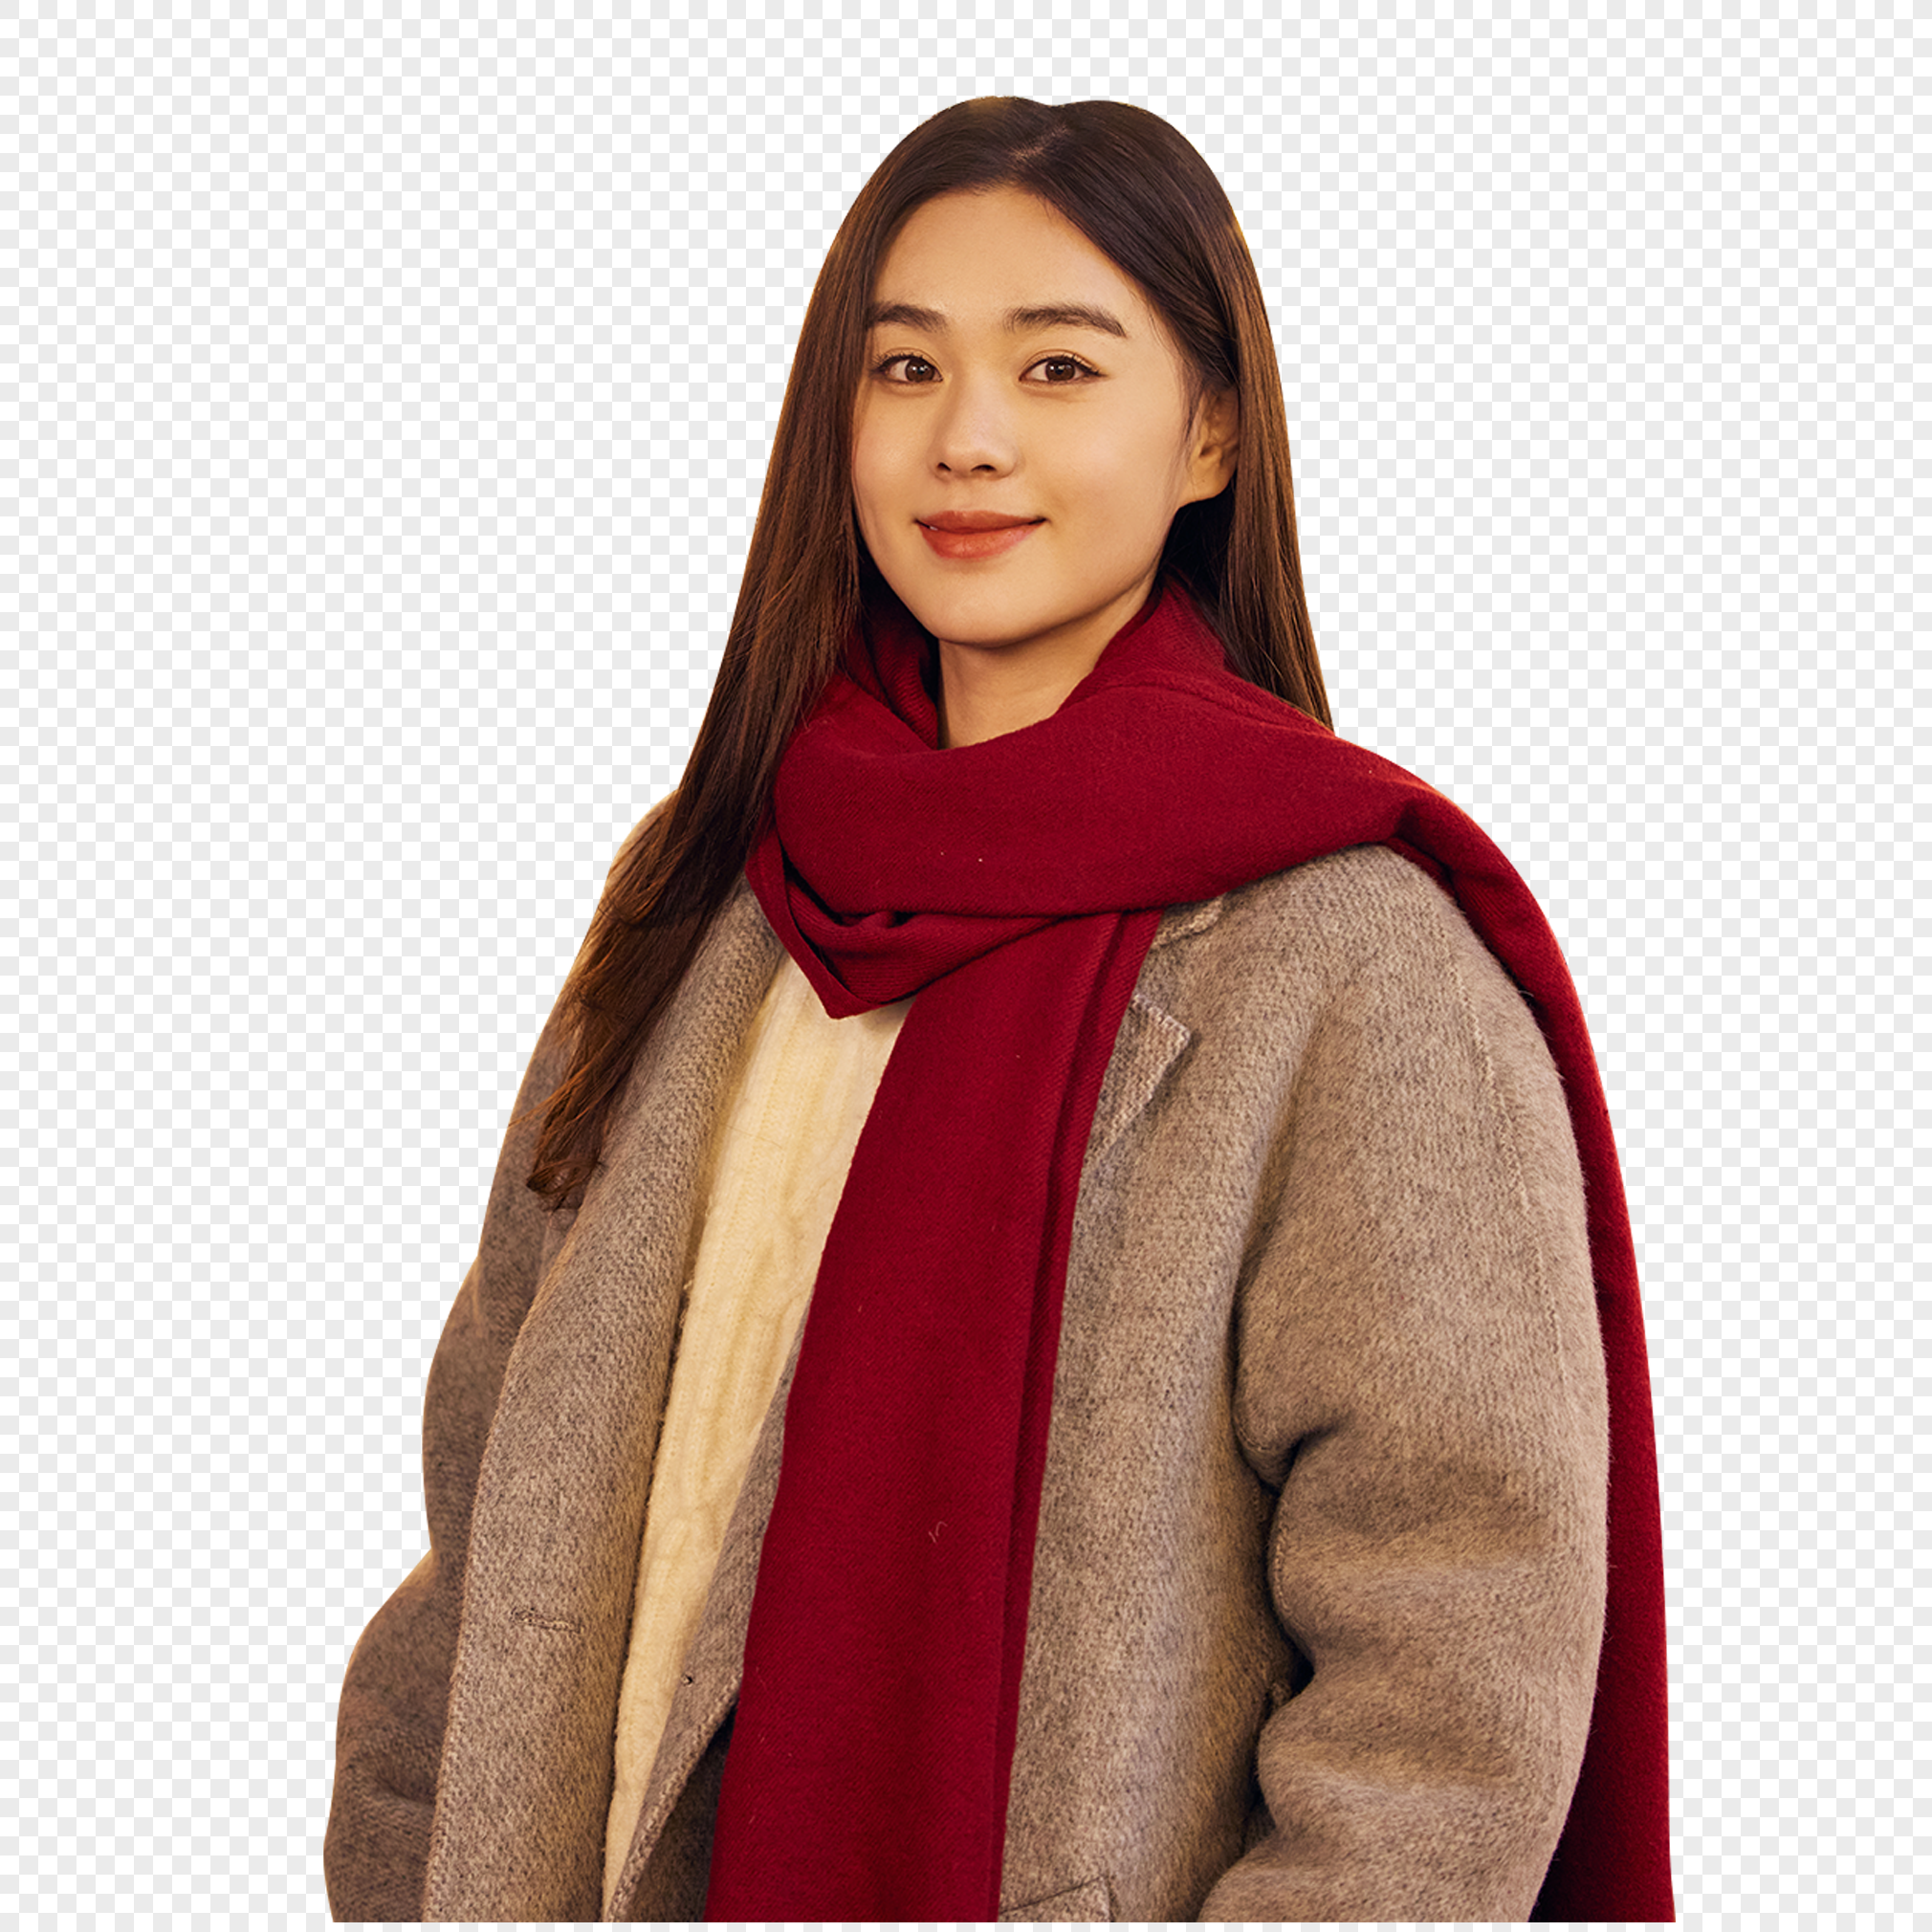 Winter Women PNG Images With Transparent Background